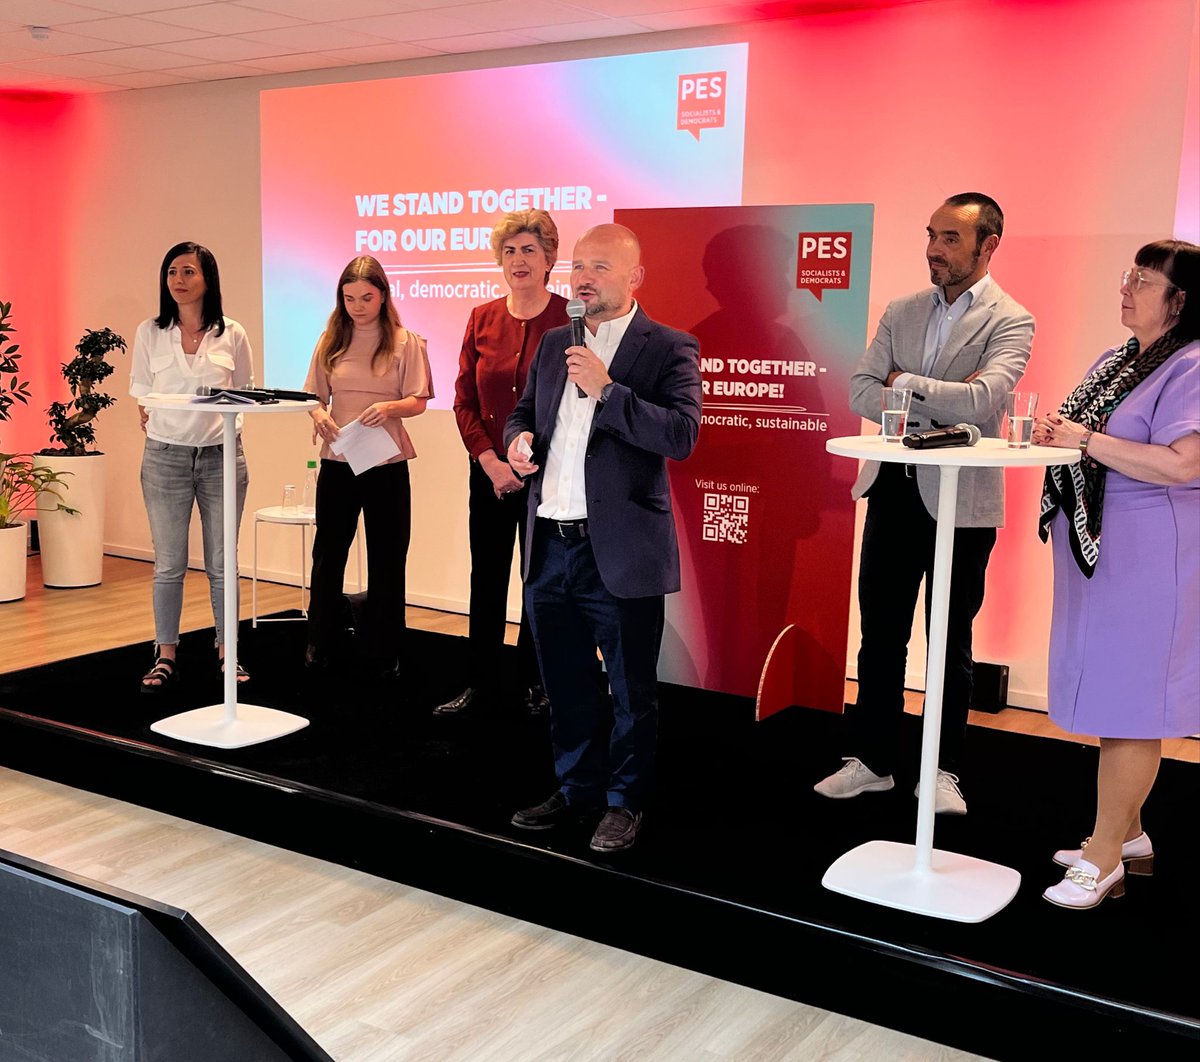 Our deputy Sec Gen @yonnecpolet is introducing the speakers of tonight: @MJRodriguesEU , #BrunoTobback, @EstherLynchs, @DuyCelik and @Sofie_Stage. 🗣️ Let's continue to be mobilised in the last weeks. Together with Nicolas we can win these elections.